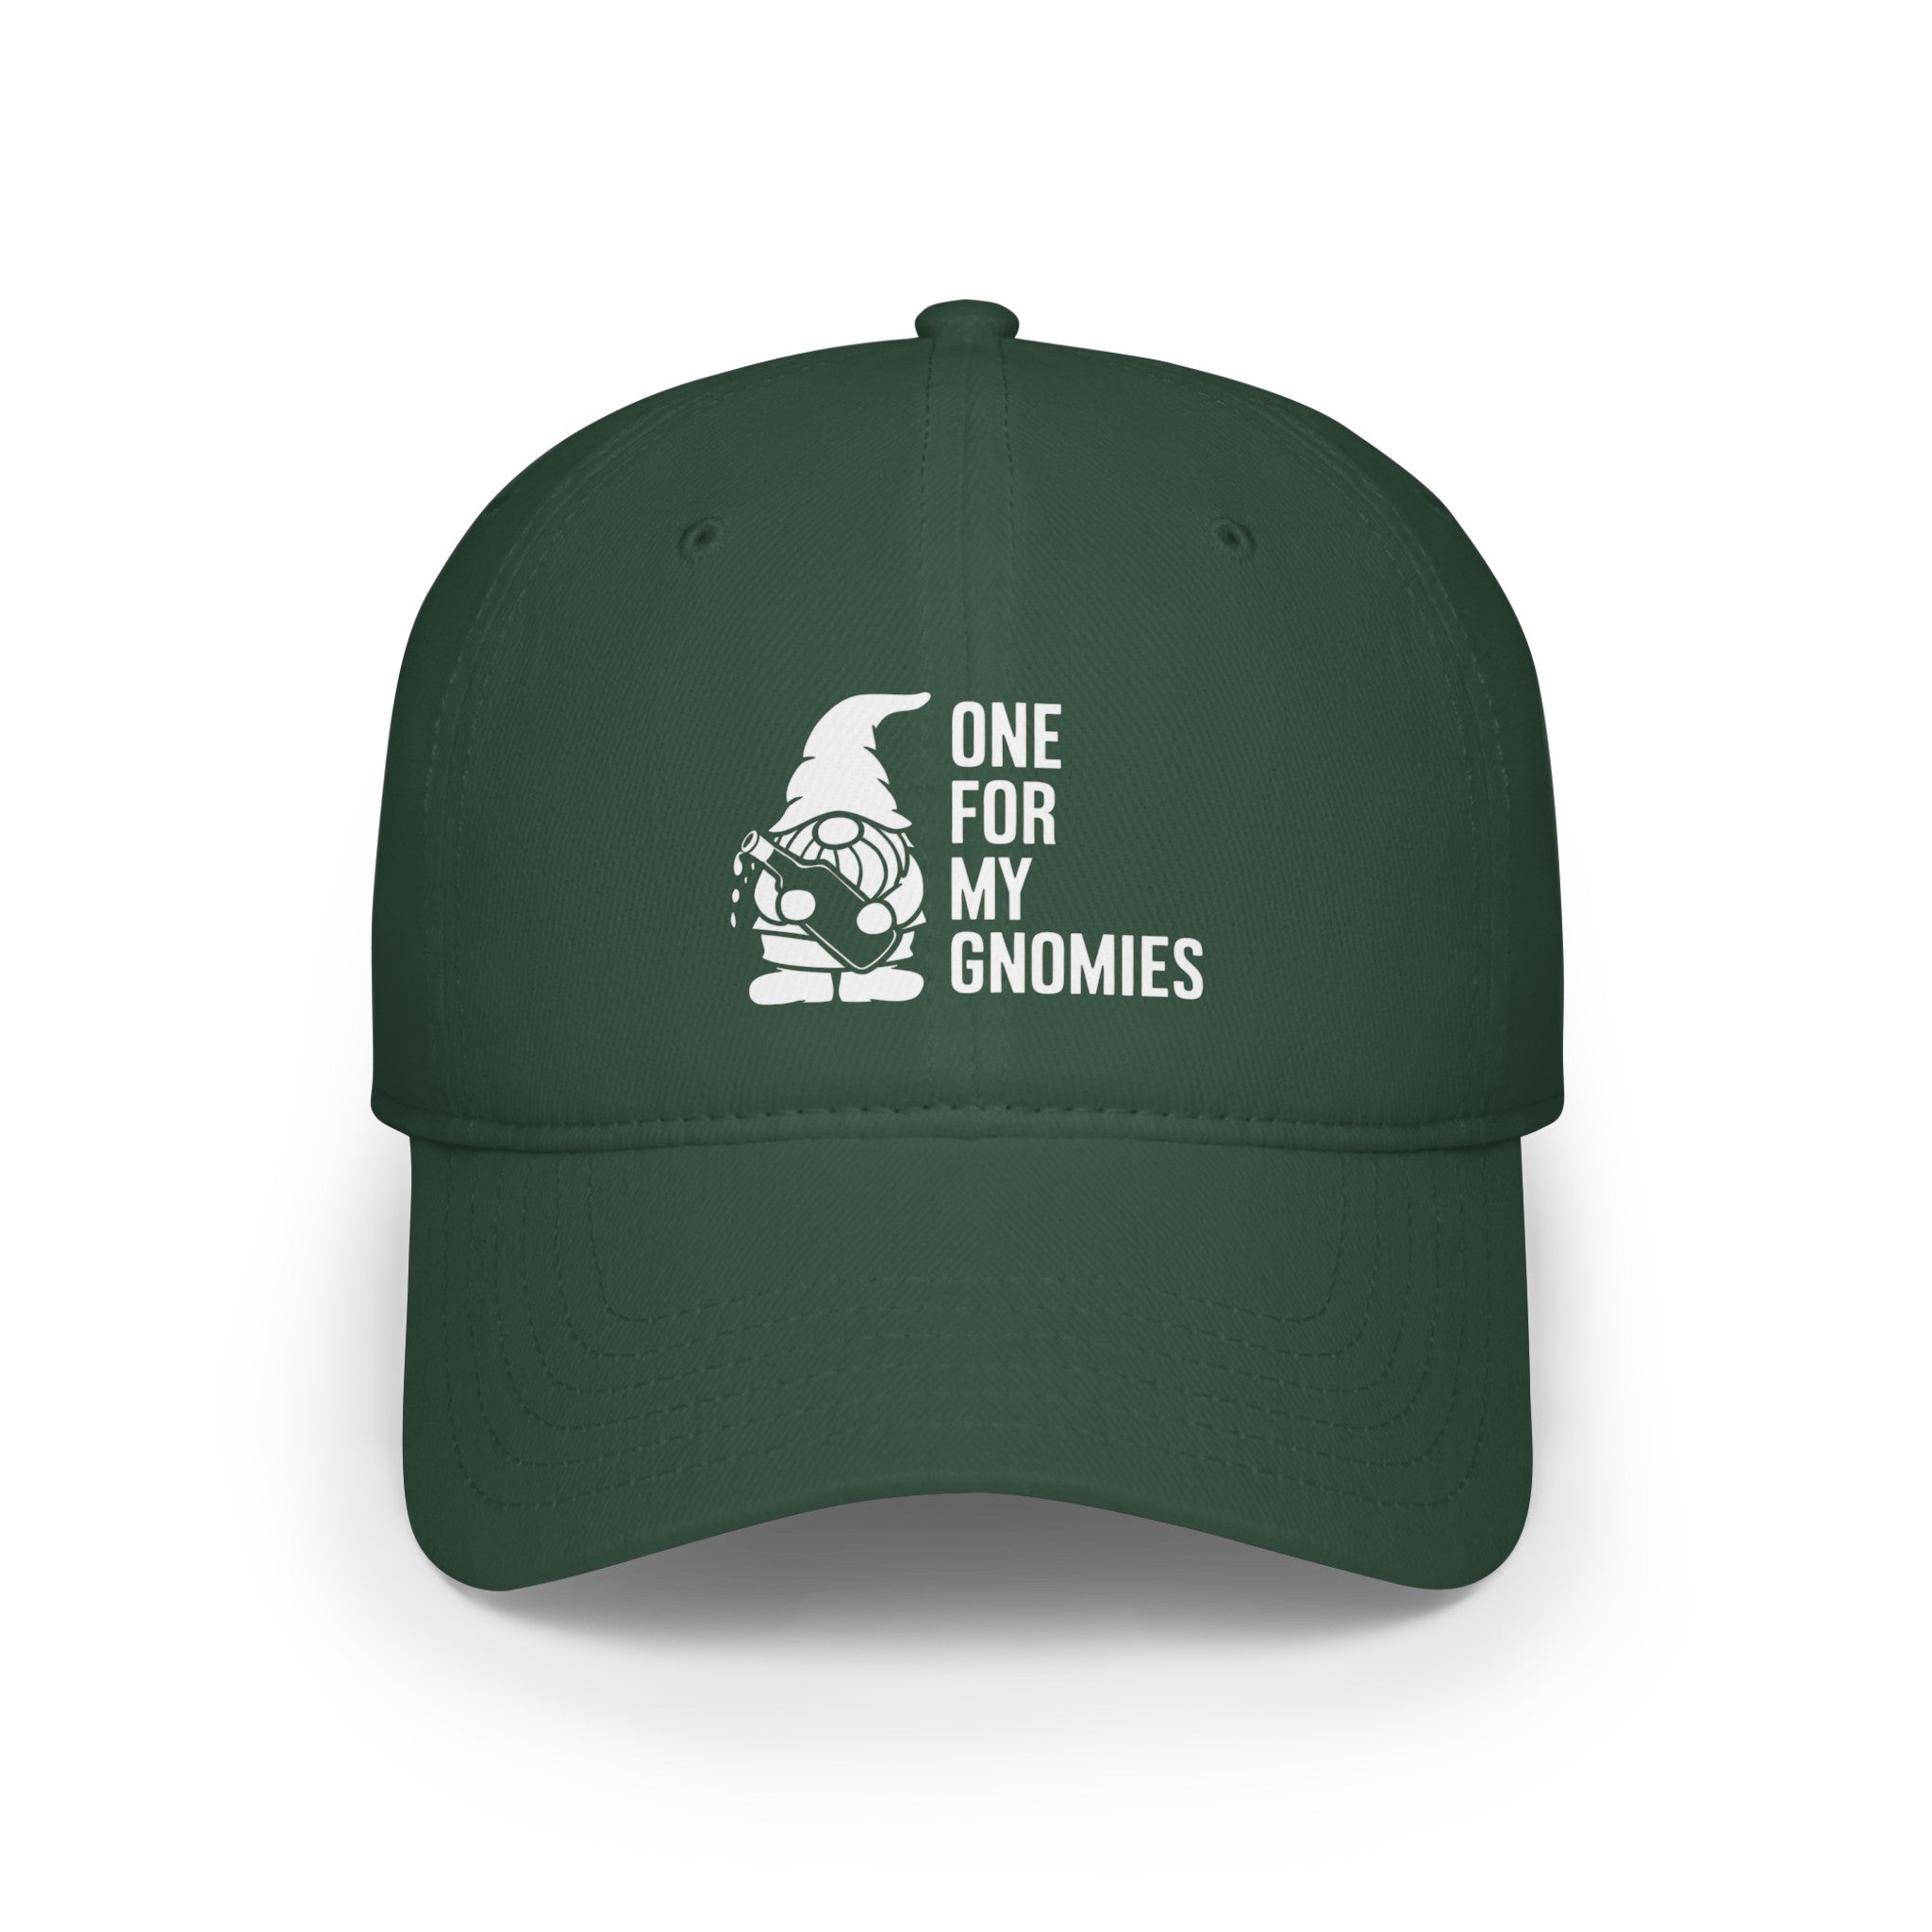 A One For My Gnomies - Hat featuring an illustration of a gnome next to the phrase "ONE FOR MY GNOMIES" in white text on the front, complete with reinforced stitching for durability.